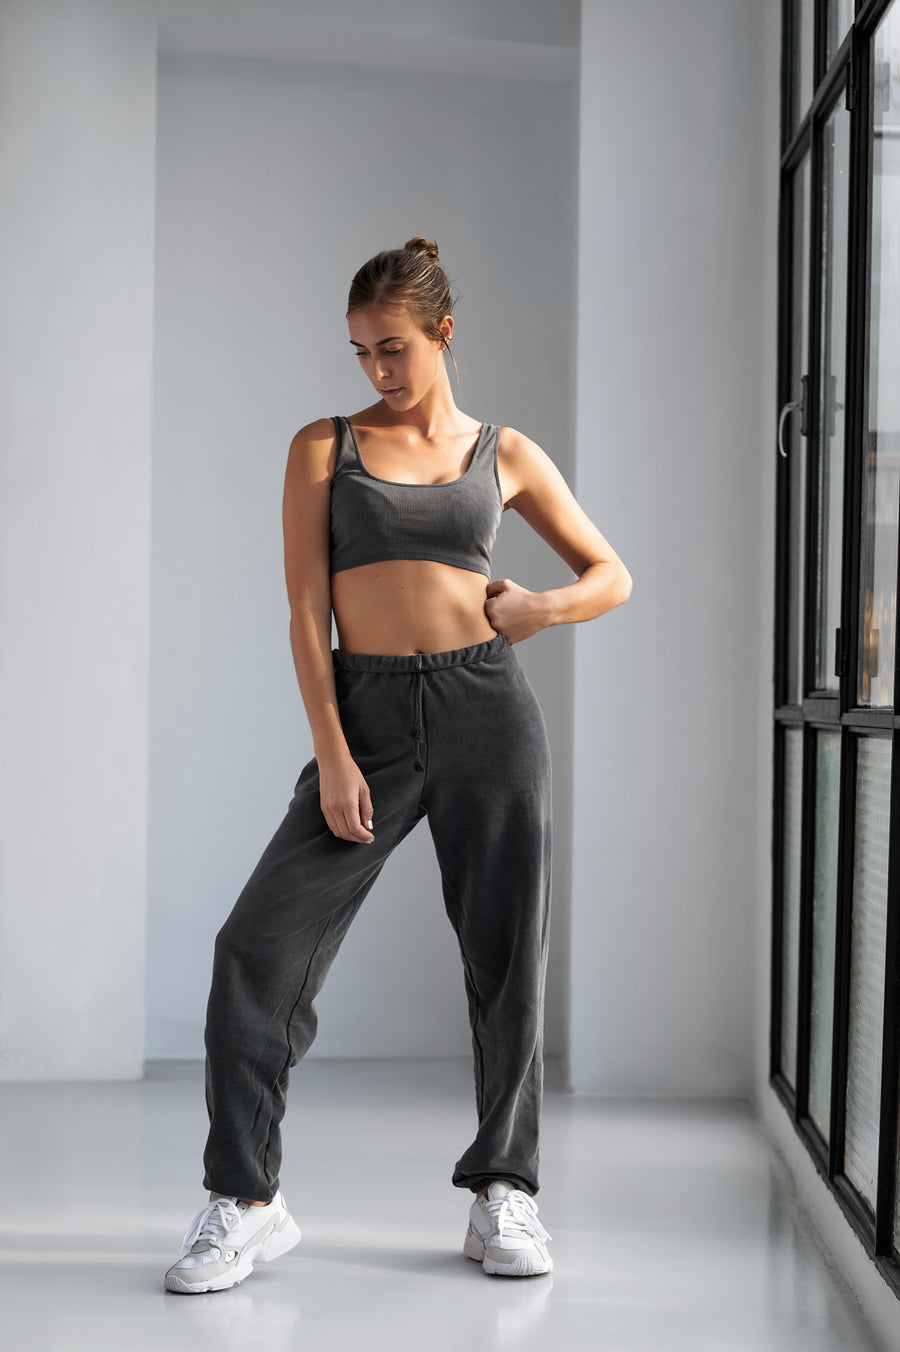 Hygge Jogger - Charcoal Gray - Front Image 2 - Extreme softness - Warm & Smooth Feeling - Easy-to-Wear & Versatile - Easy-to-Match - High Quality Basic - Streetstyle - Streetwear - Loose-fit - Oversized -  Cuffed ankles - Adjustable high or low waist due to drawstring - Elastic wasitband - Worn-out look - Essential wear - Casual - Sophisticated - Becca & Cole